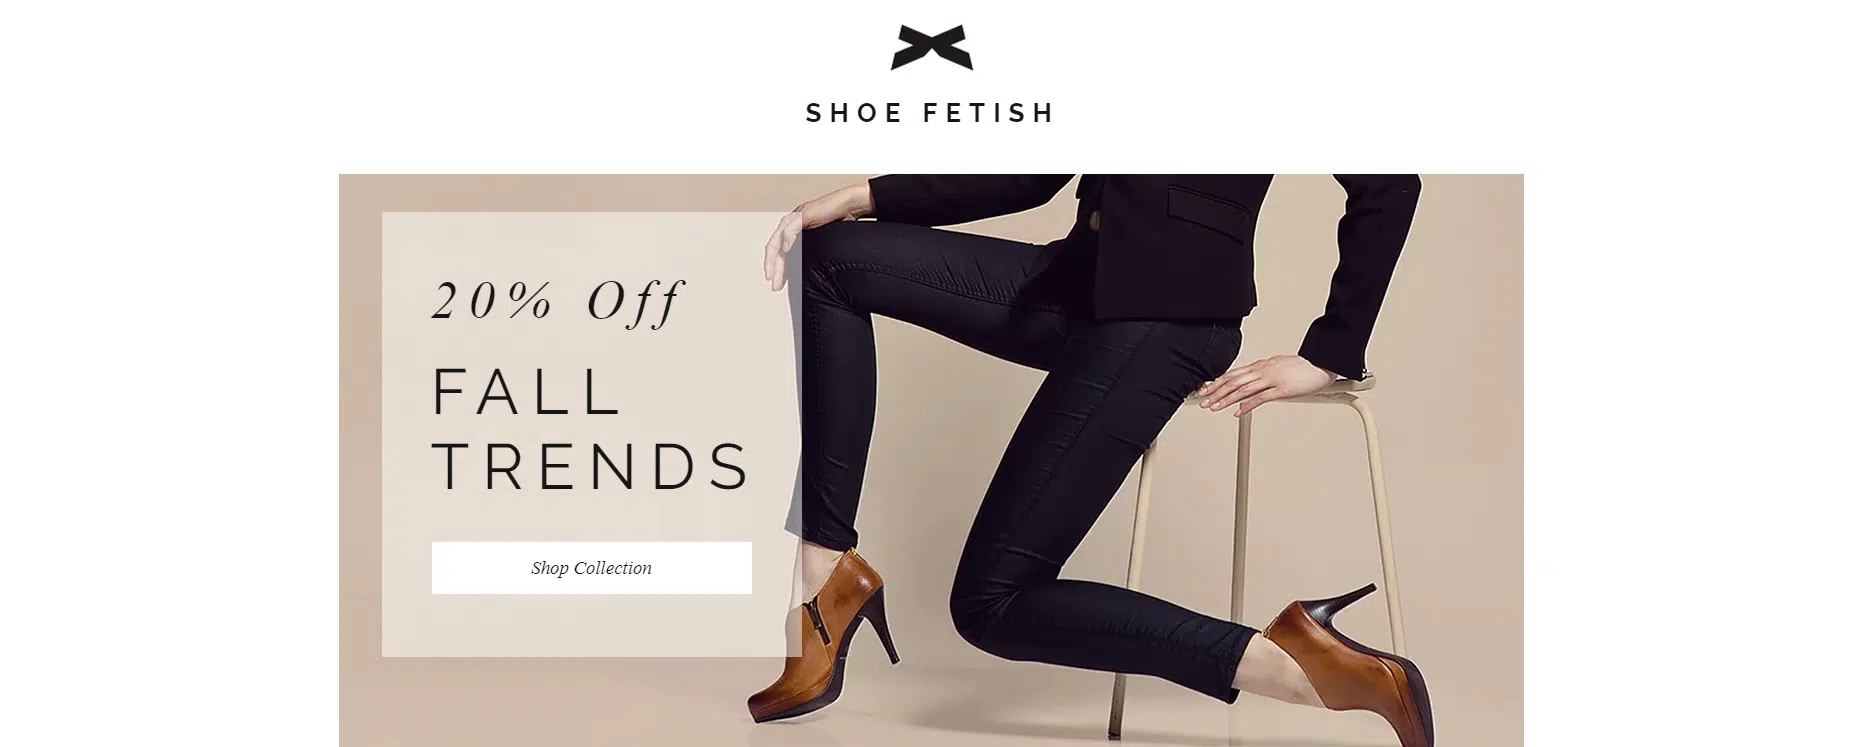 Shoes Website Template